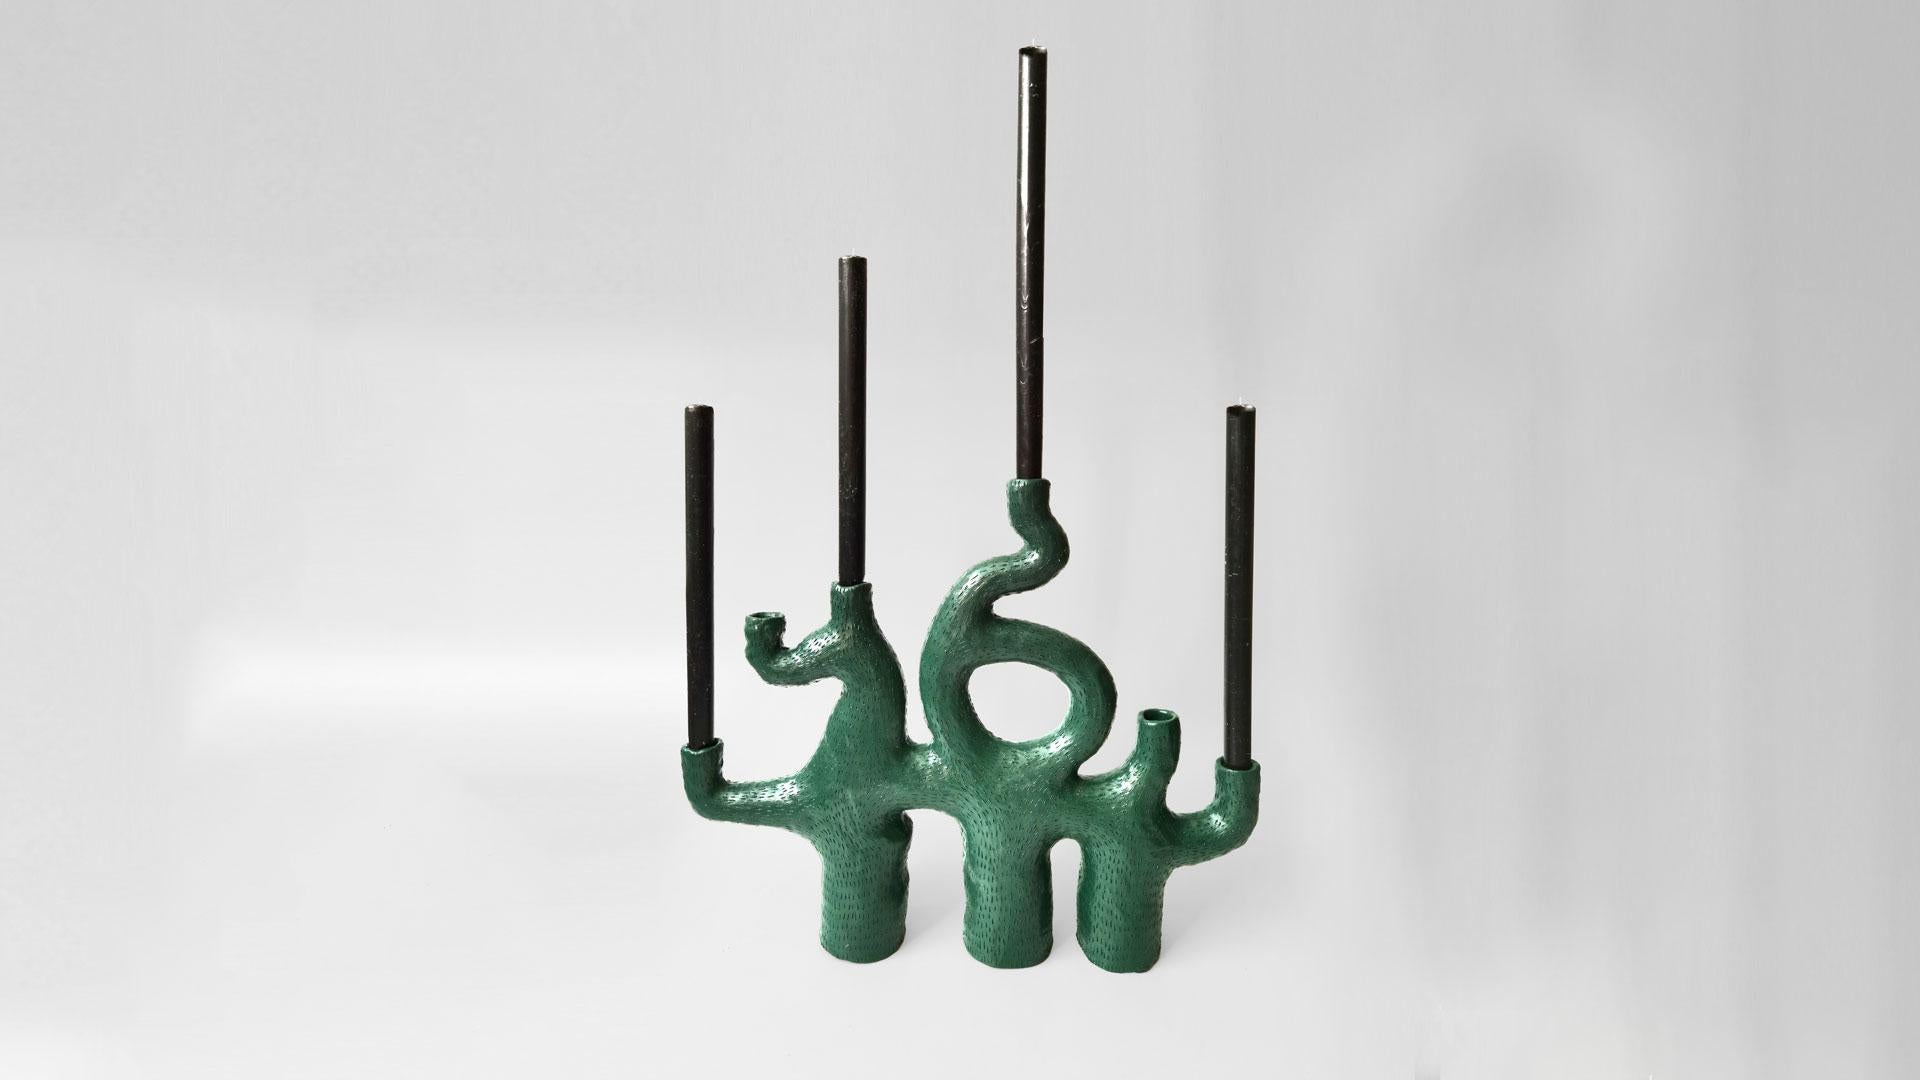 This coral inspired candelabra has 6 Arms and can hold up to 6 candles.
Although it is functional, the shape of this candelabra also suggests the curves of a sculpture. You can place it on your dinner table, coffee table, kitchen island,